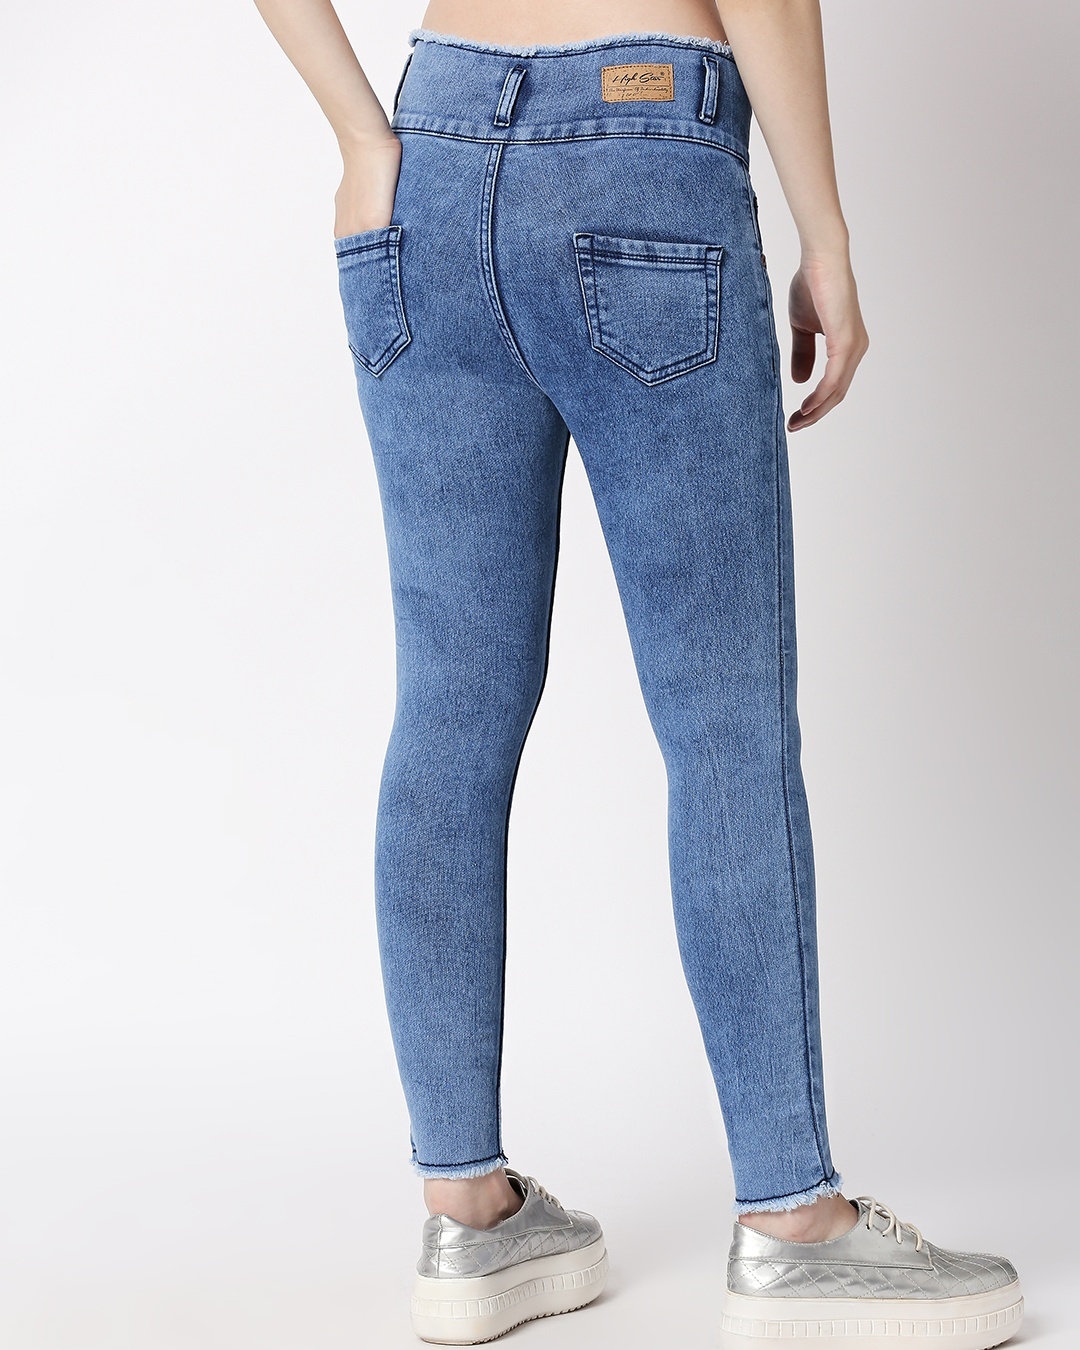 Buy Women's Blue High Rise Slim Fit Jeans for Women Blue Online at Bewakoof